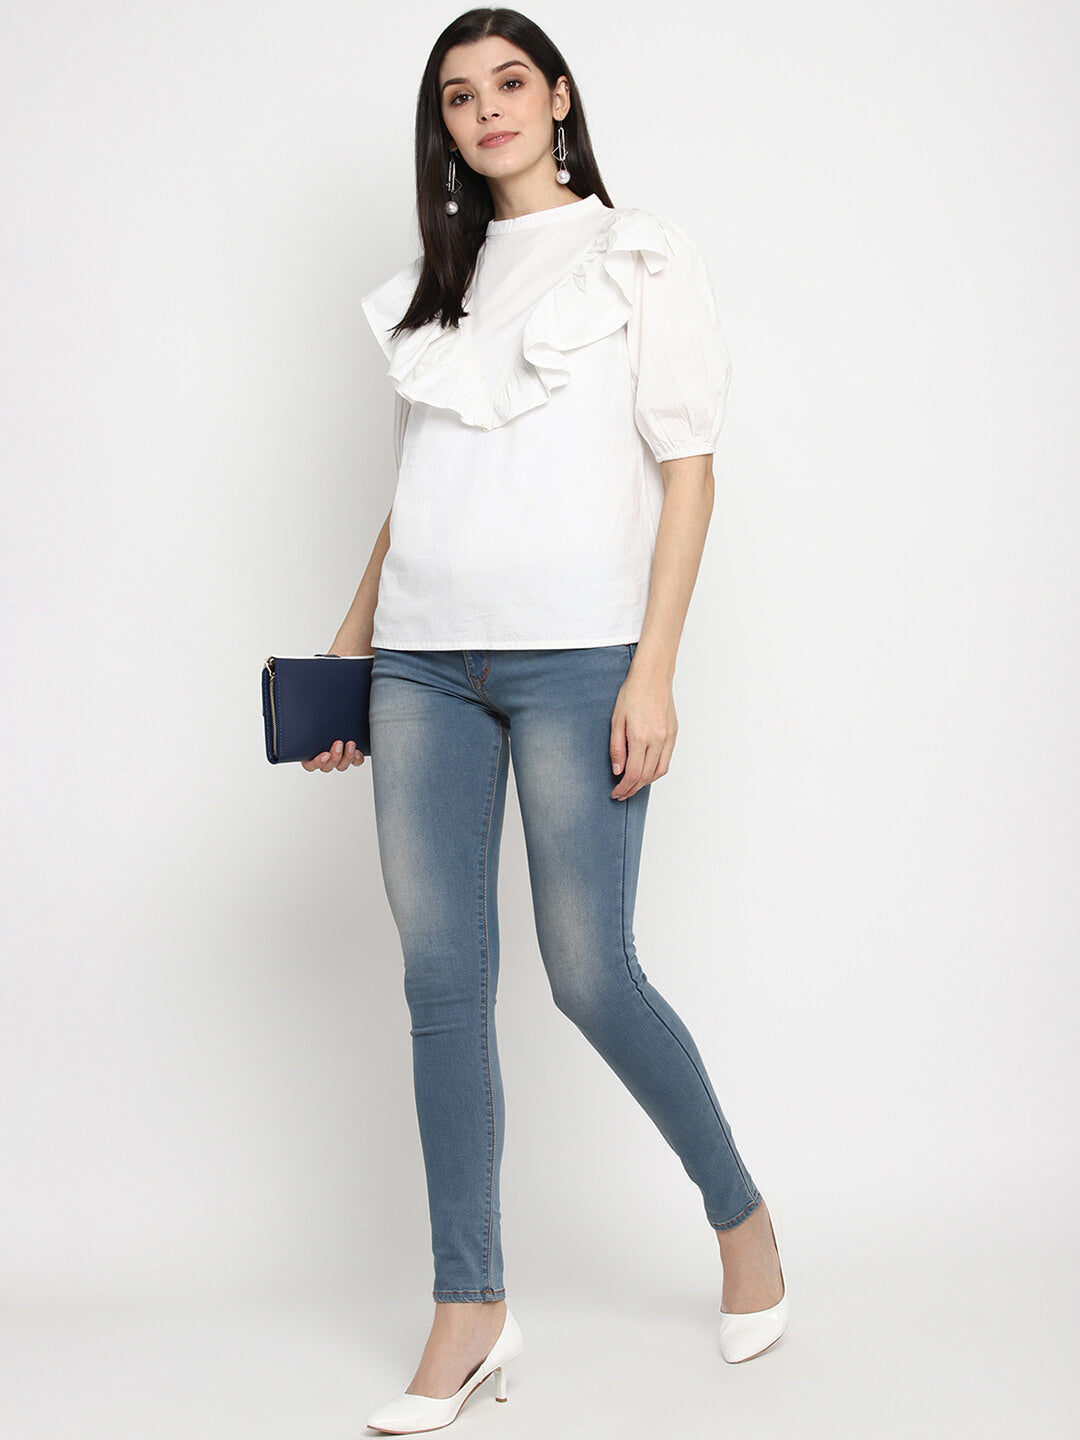 Msfq White Solid Cotton Poplin Top With Ruffles At Yoke